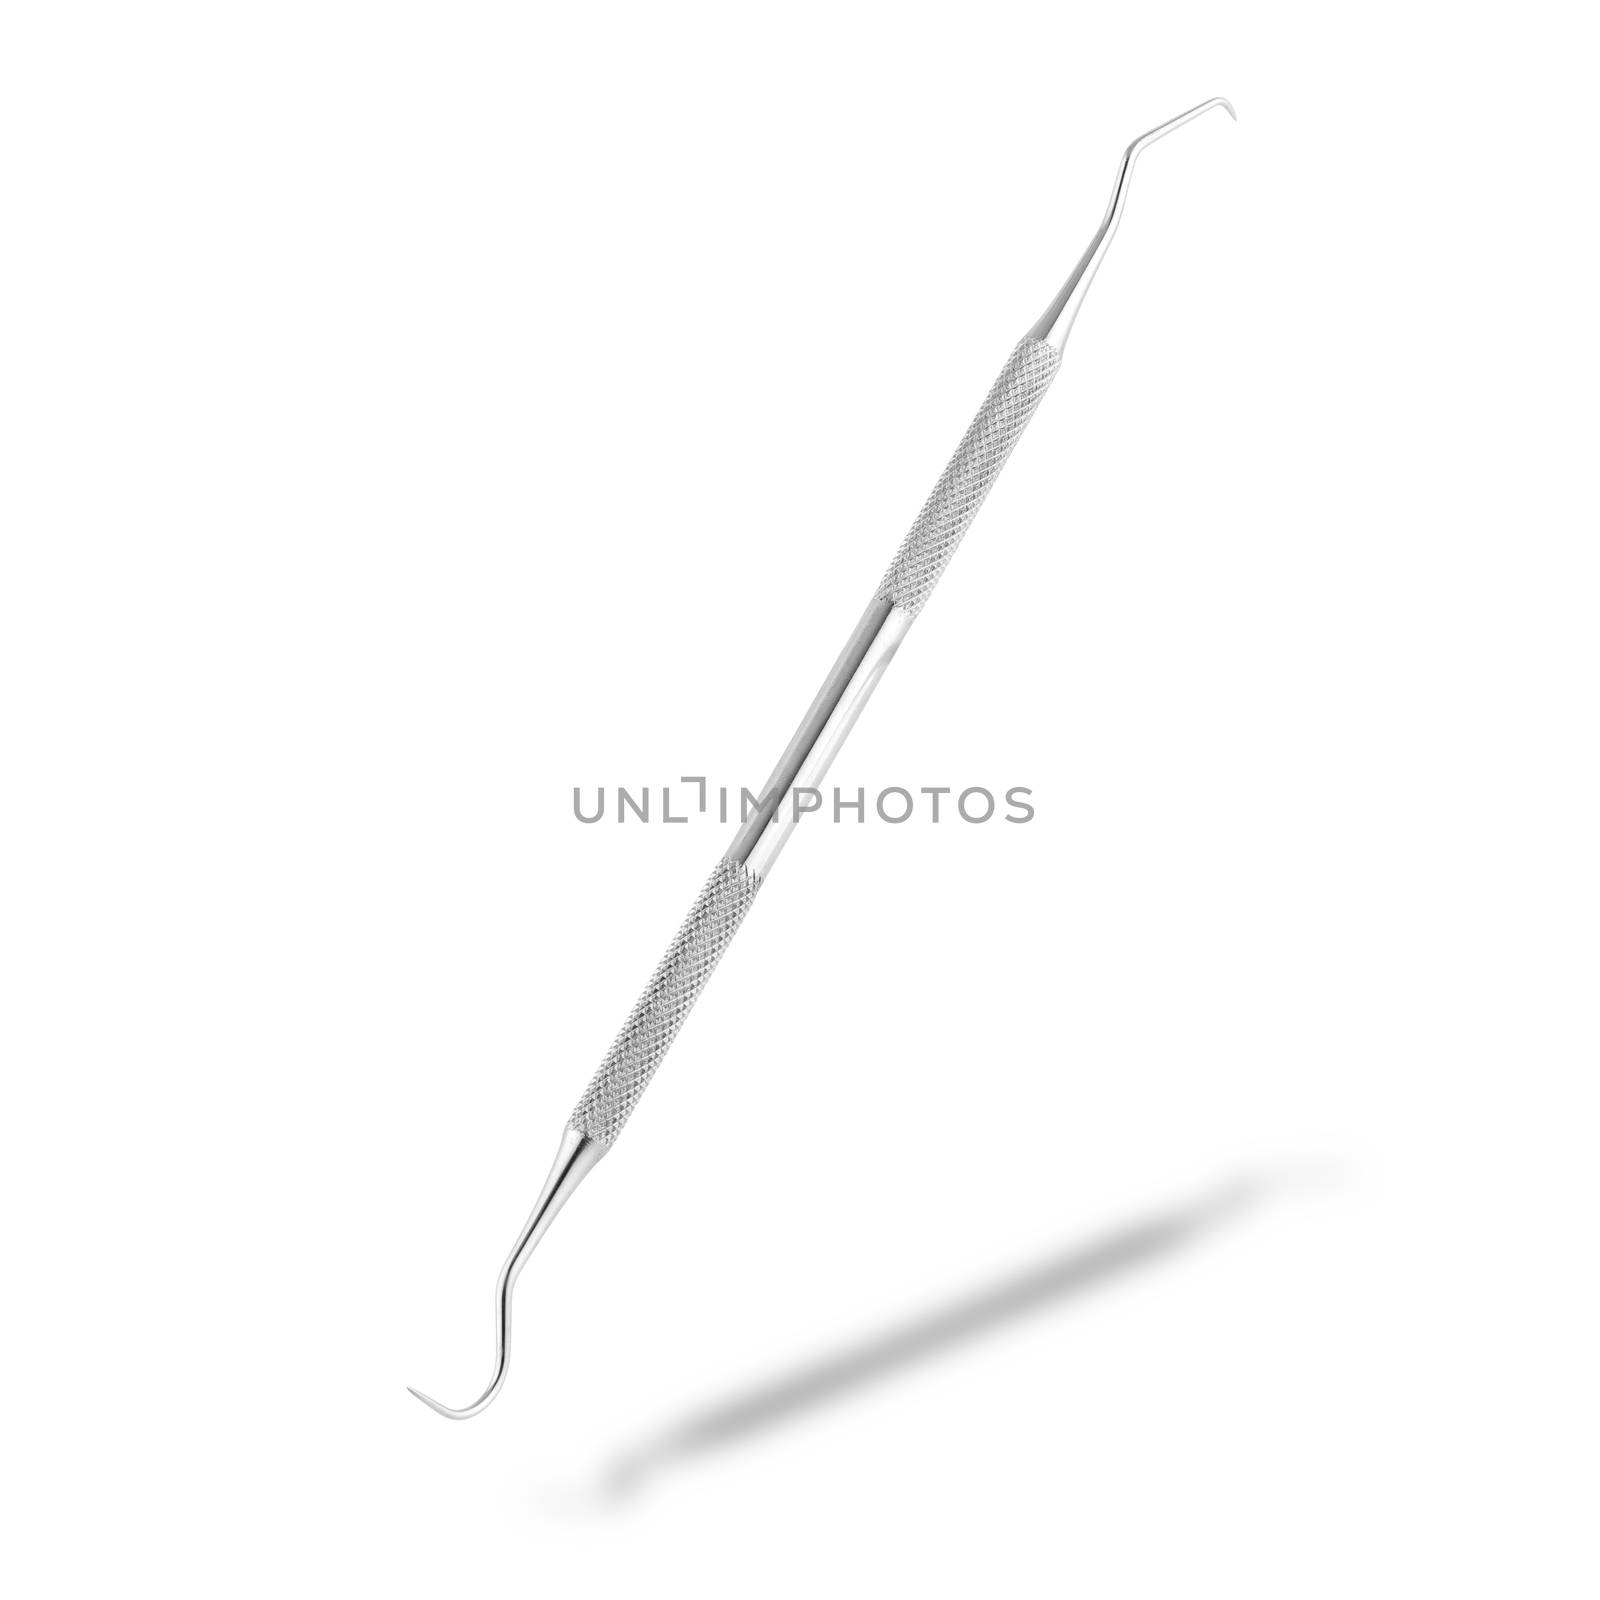 Double ended dentist's scaler and sickle probe dental explorer on white with drop shadow with clipping path by VivacityImages